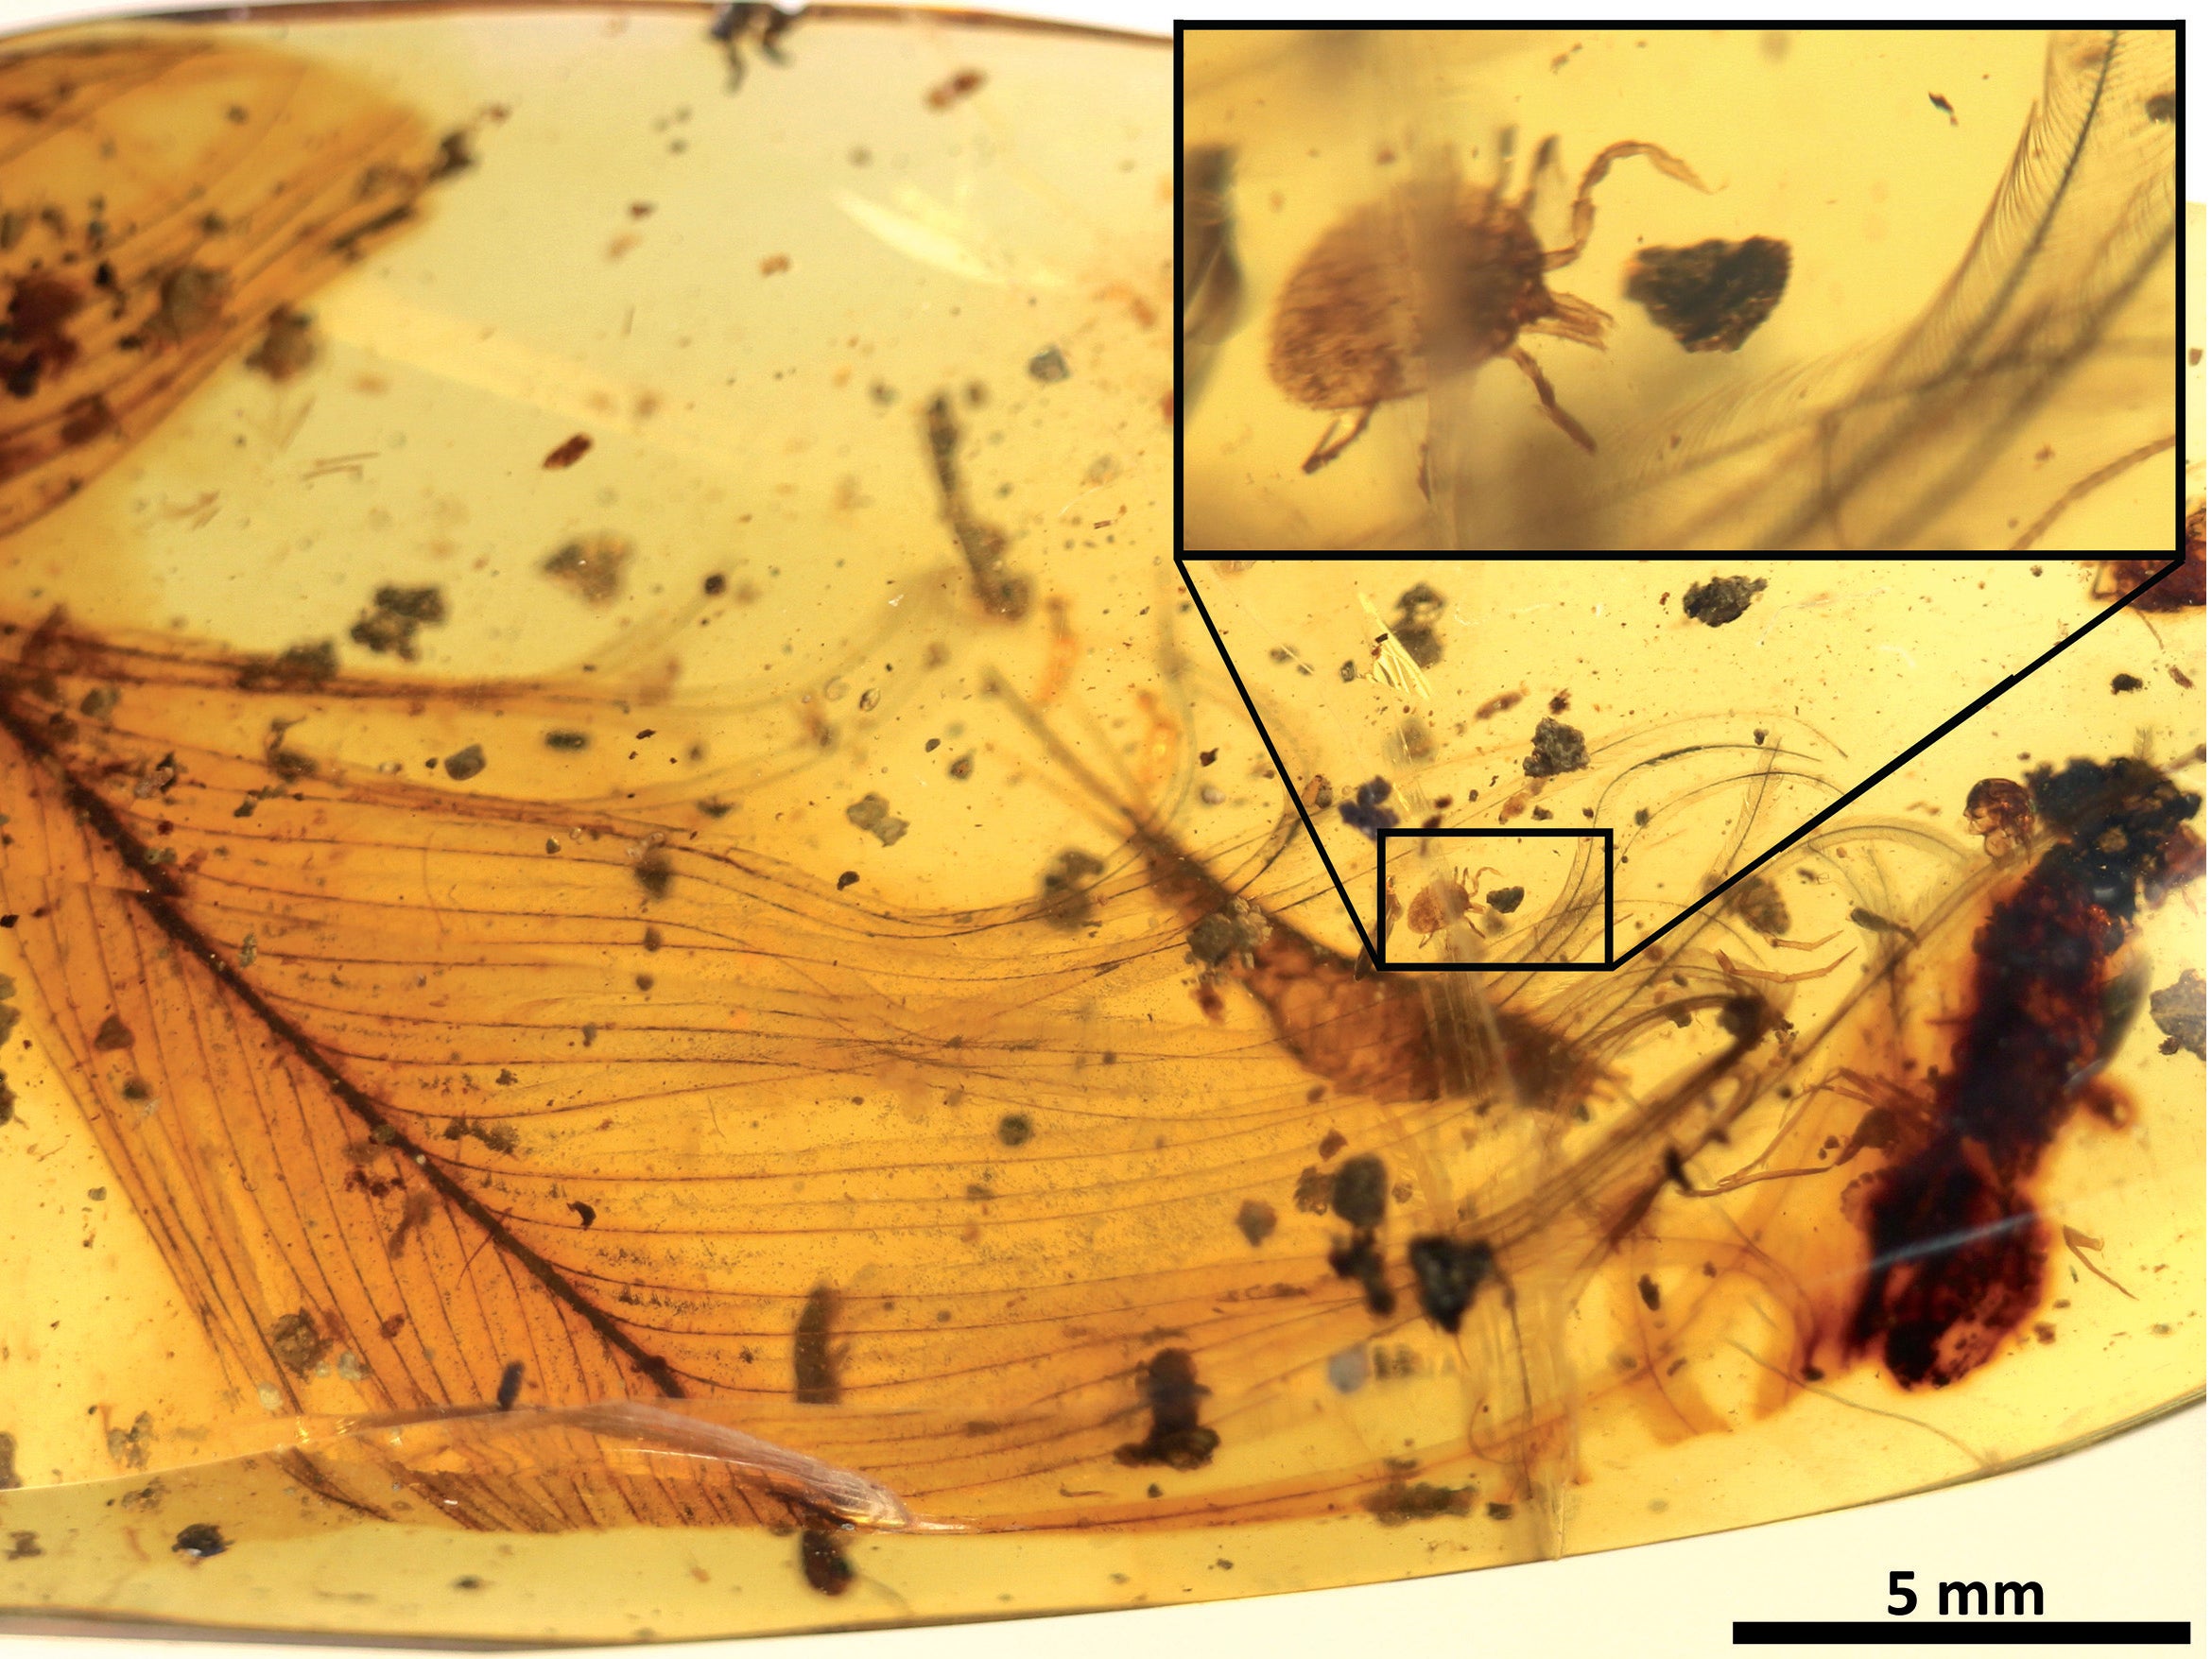 The 99 million year-old amber fossil containing a dinosaur feather accompanied by a tick